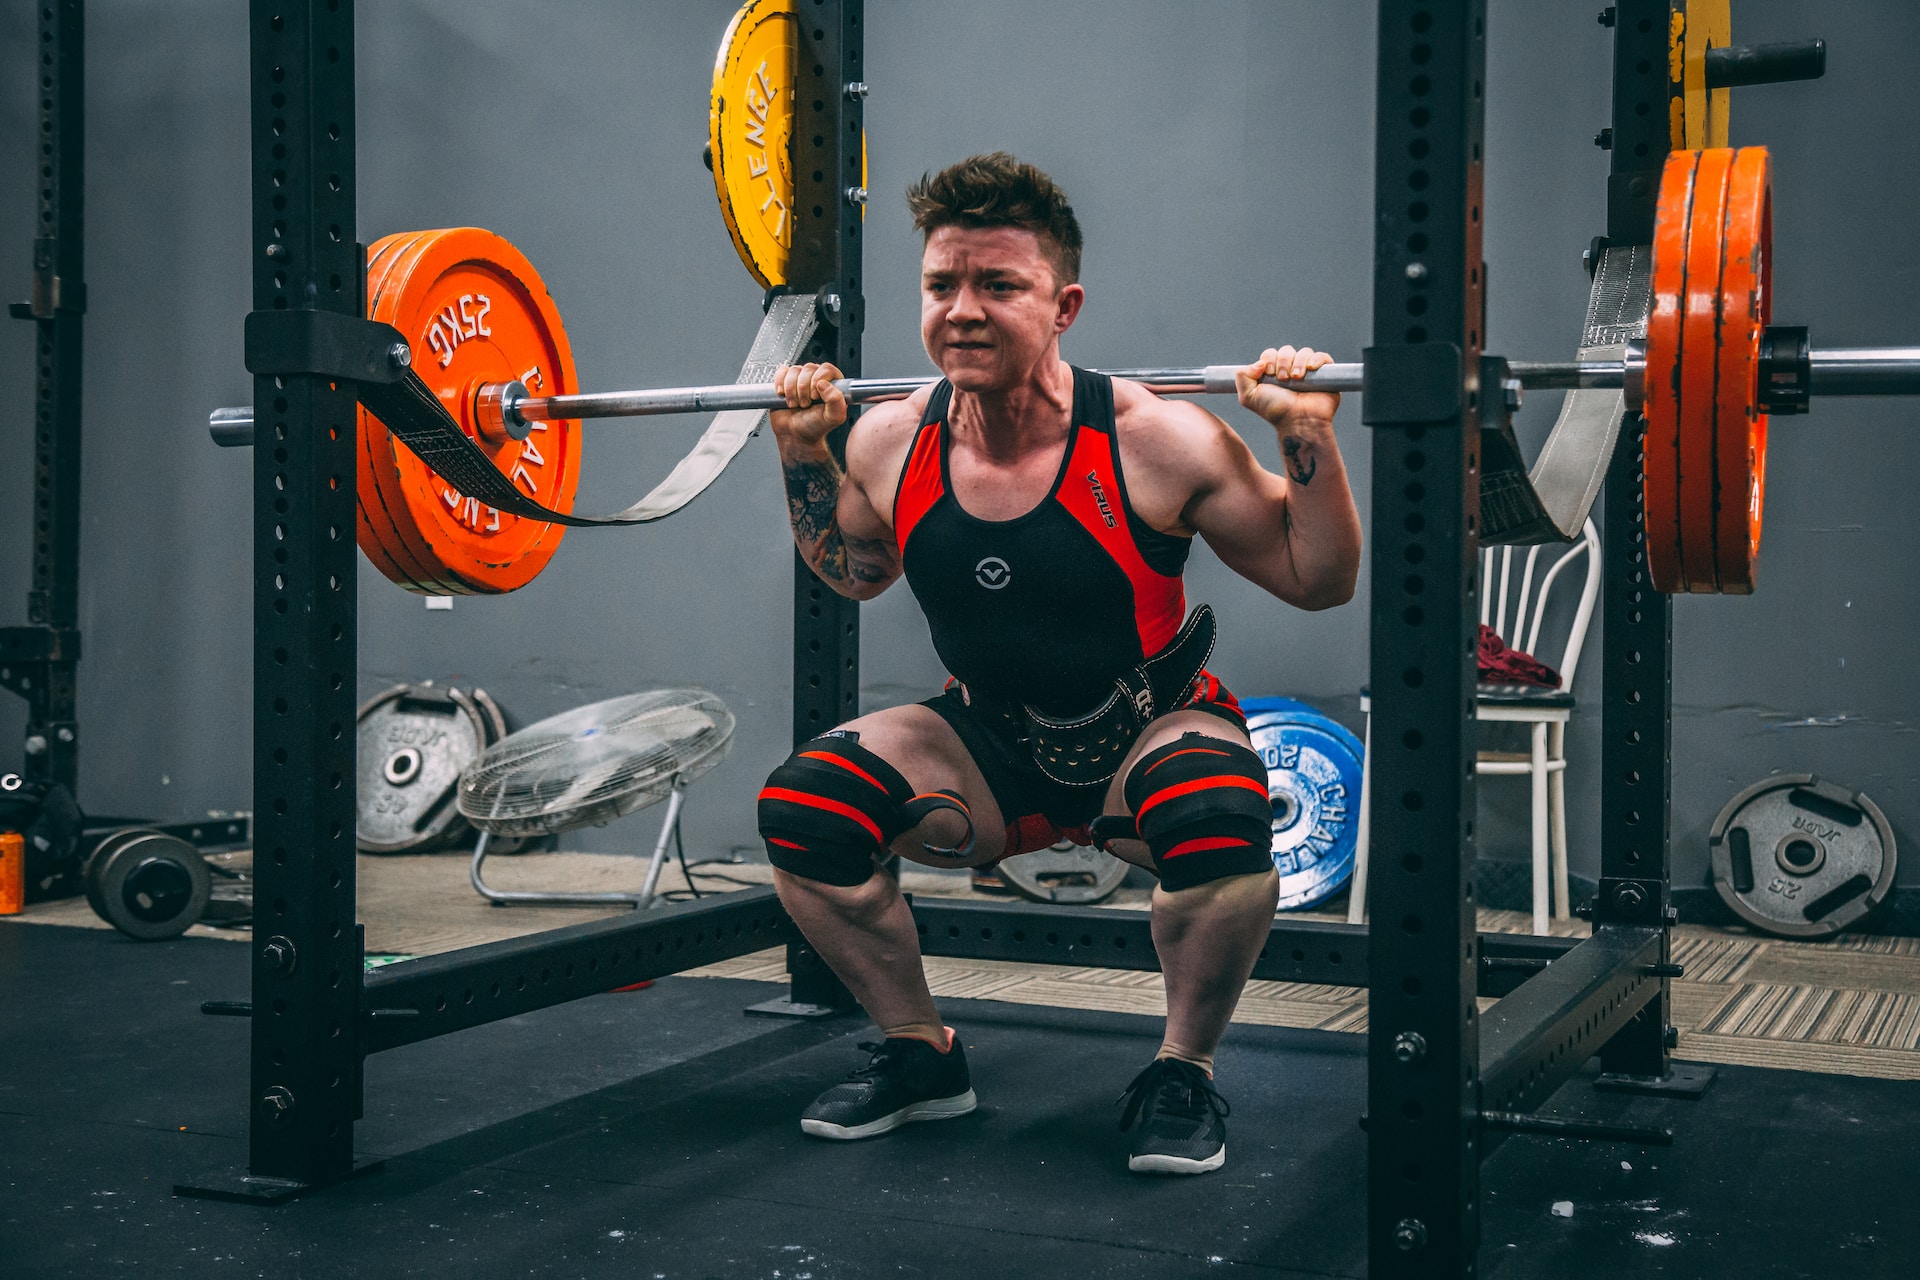 the image shows an athlete doing barbell squats at the gym